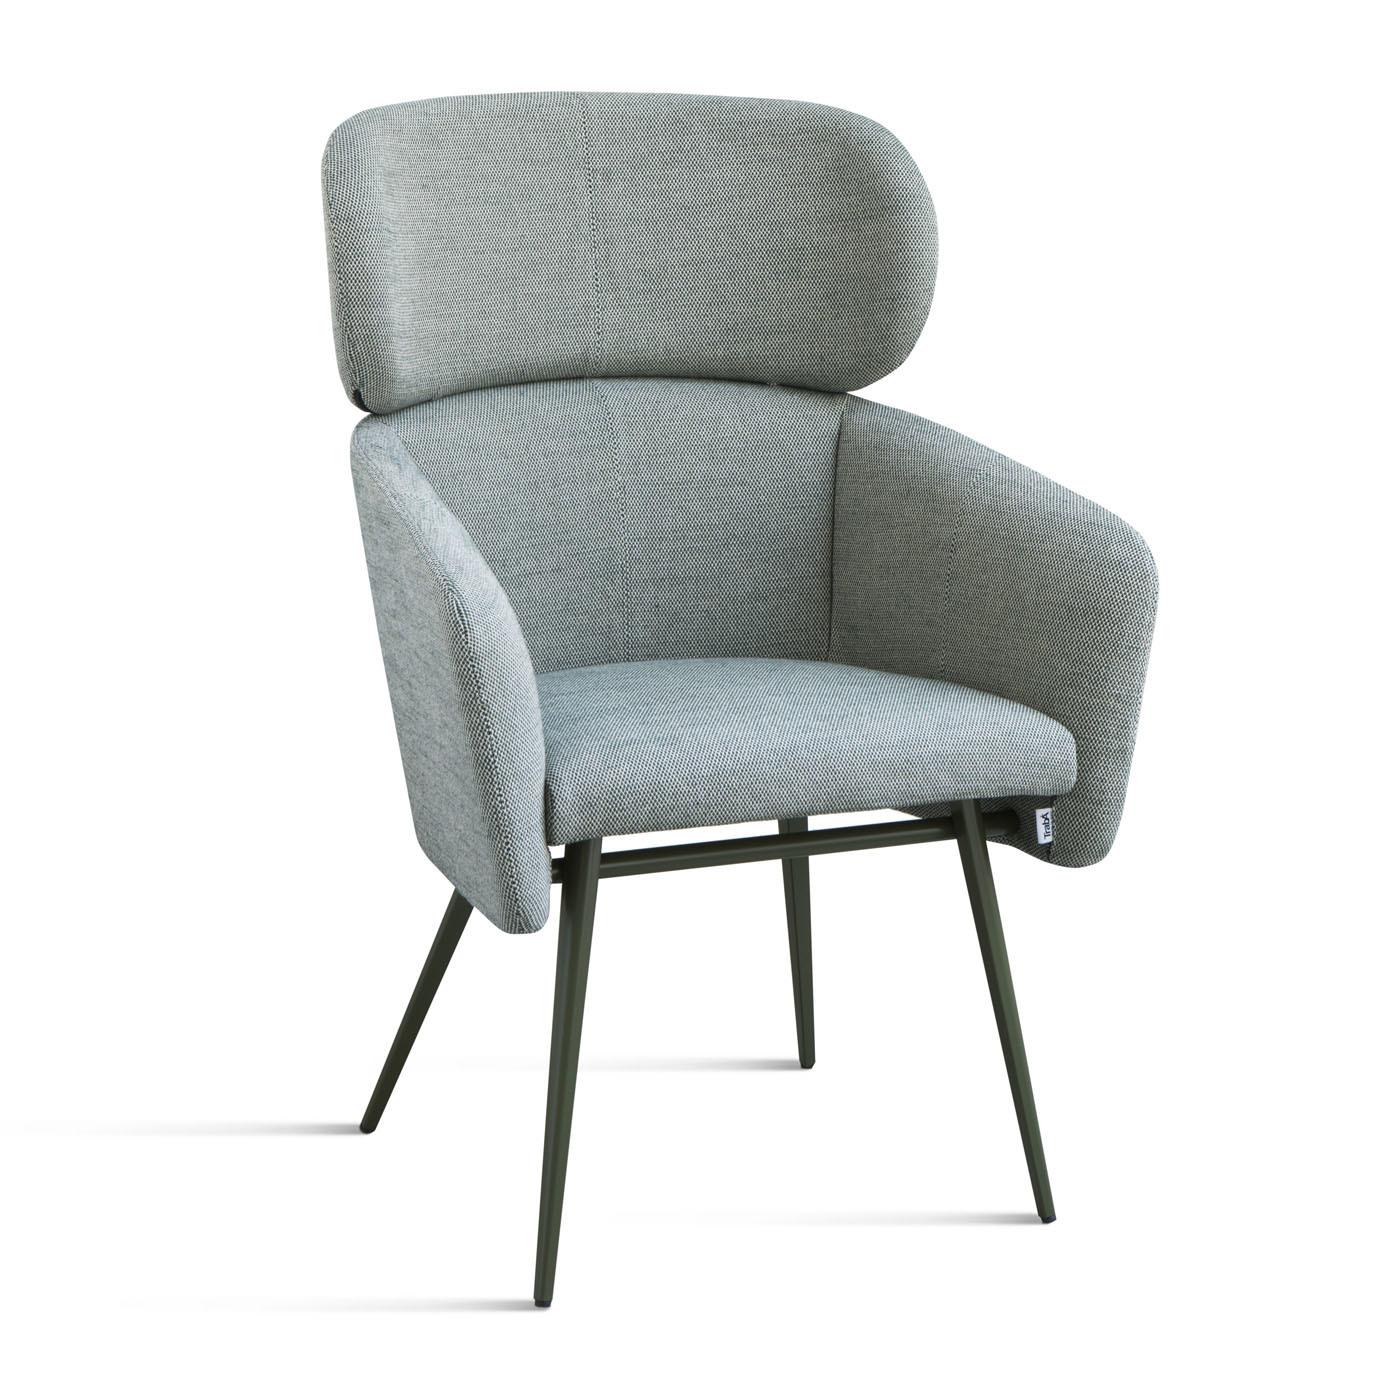 Balù Extra Large Met Light Blue Chair by Emilio Nanni In New Condition For Sale In Milan, IT